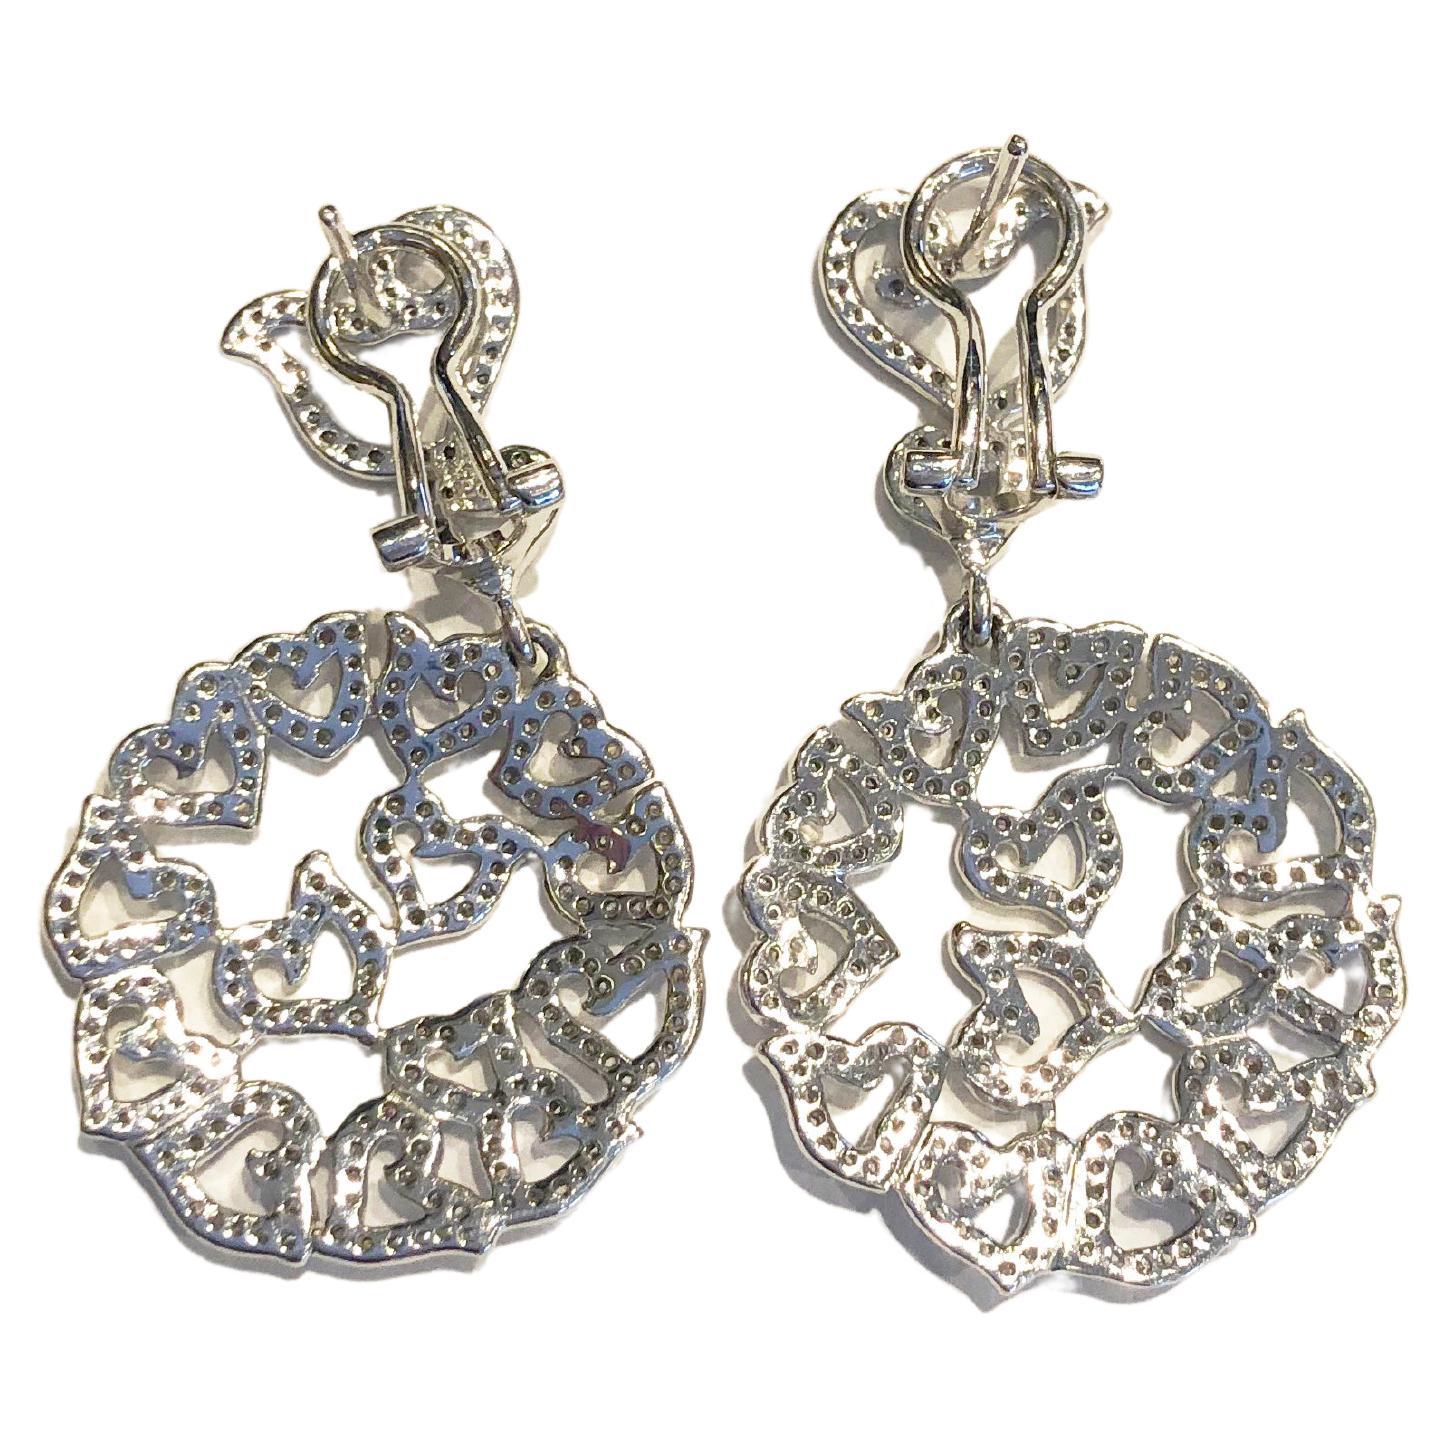 Chantecler DiAmour pavé of diamonds 18kt white Gold chandelier Earrings
Chantecler pays homage to love with the DiAmor collection, femenine and sophisticated, where the heart theme becomes a secret handwriting, a texture set in the perfect pavé of